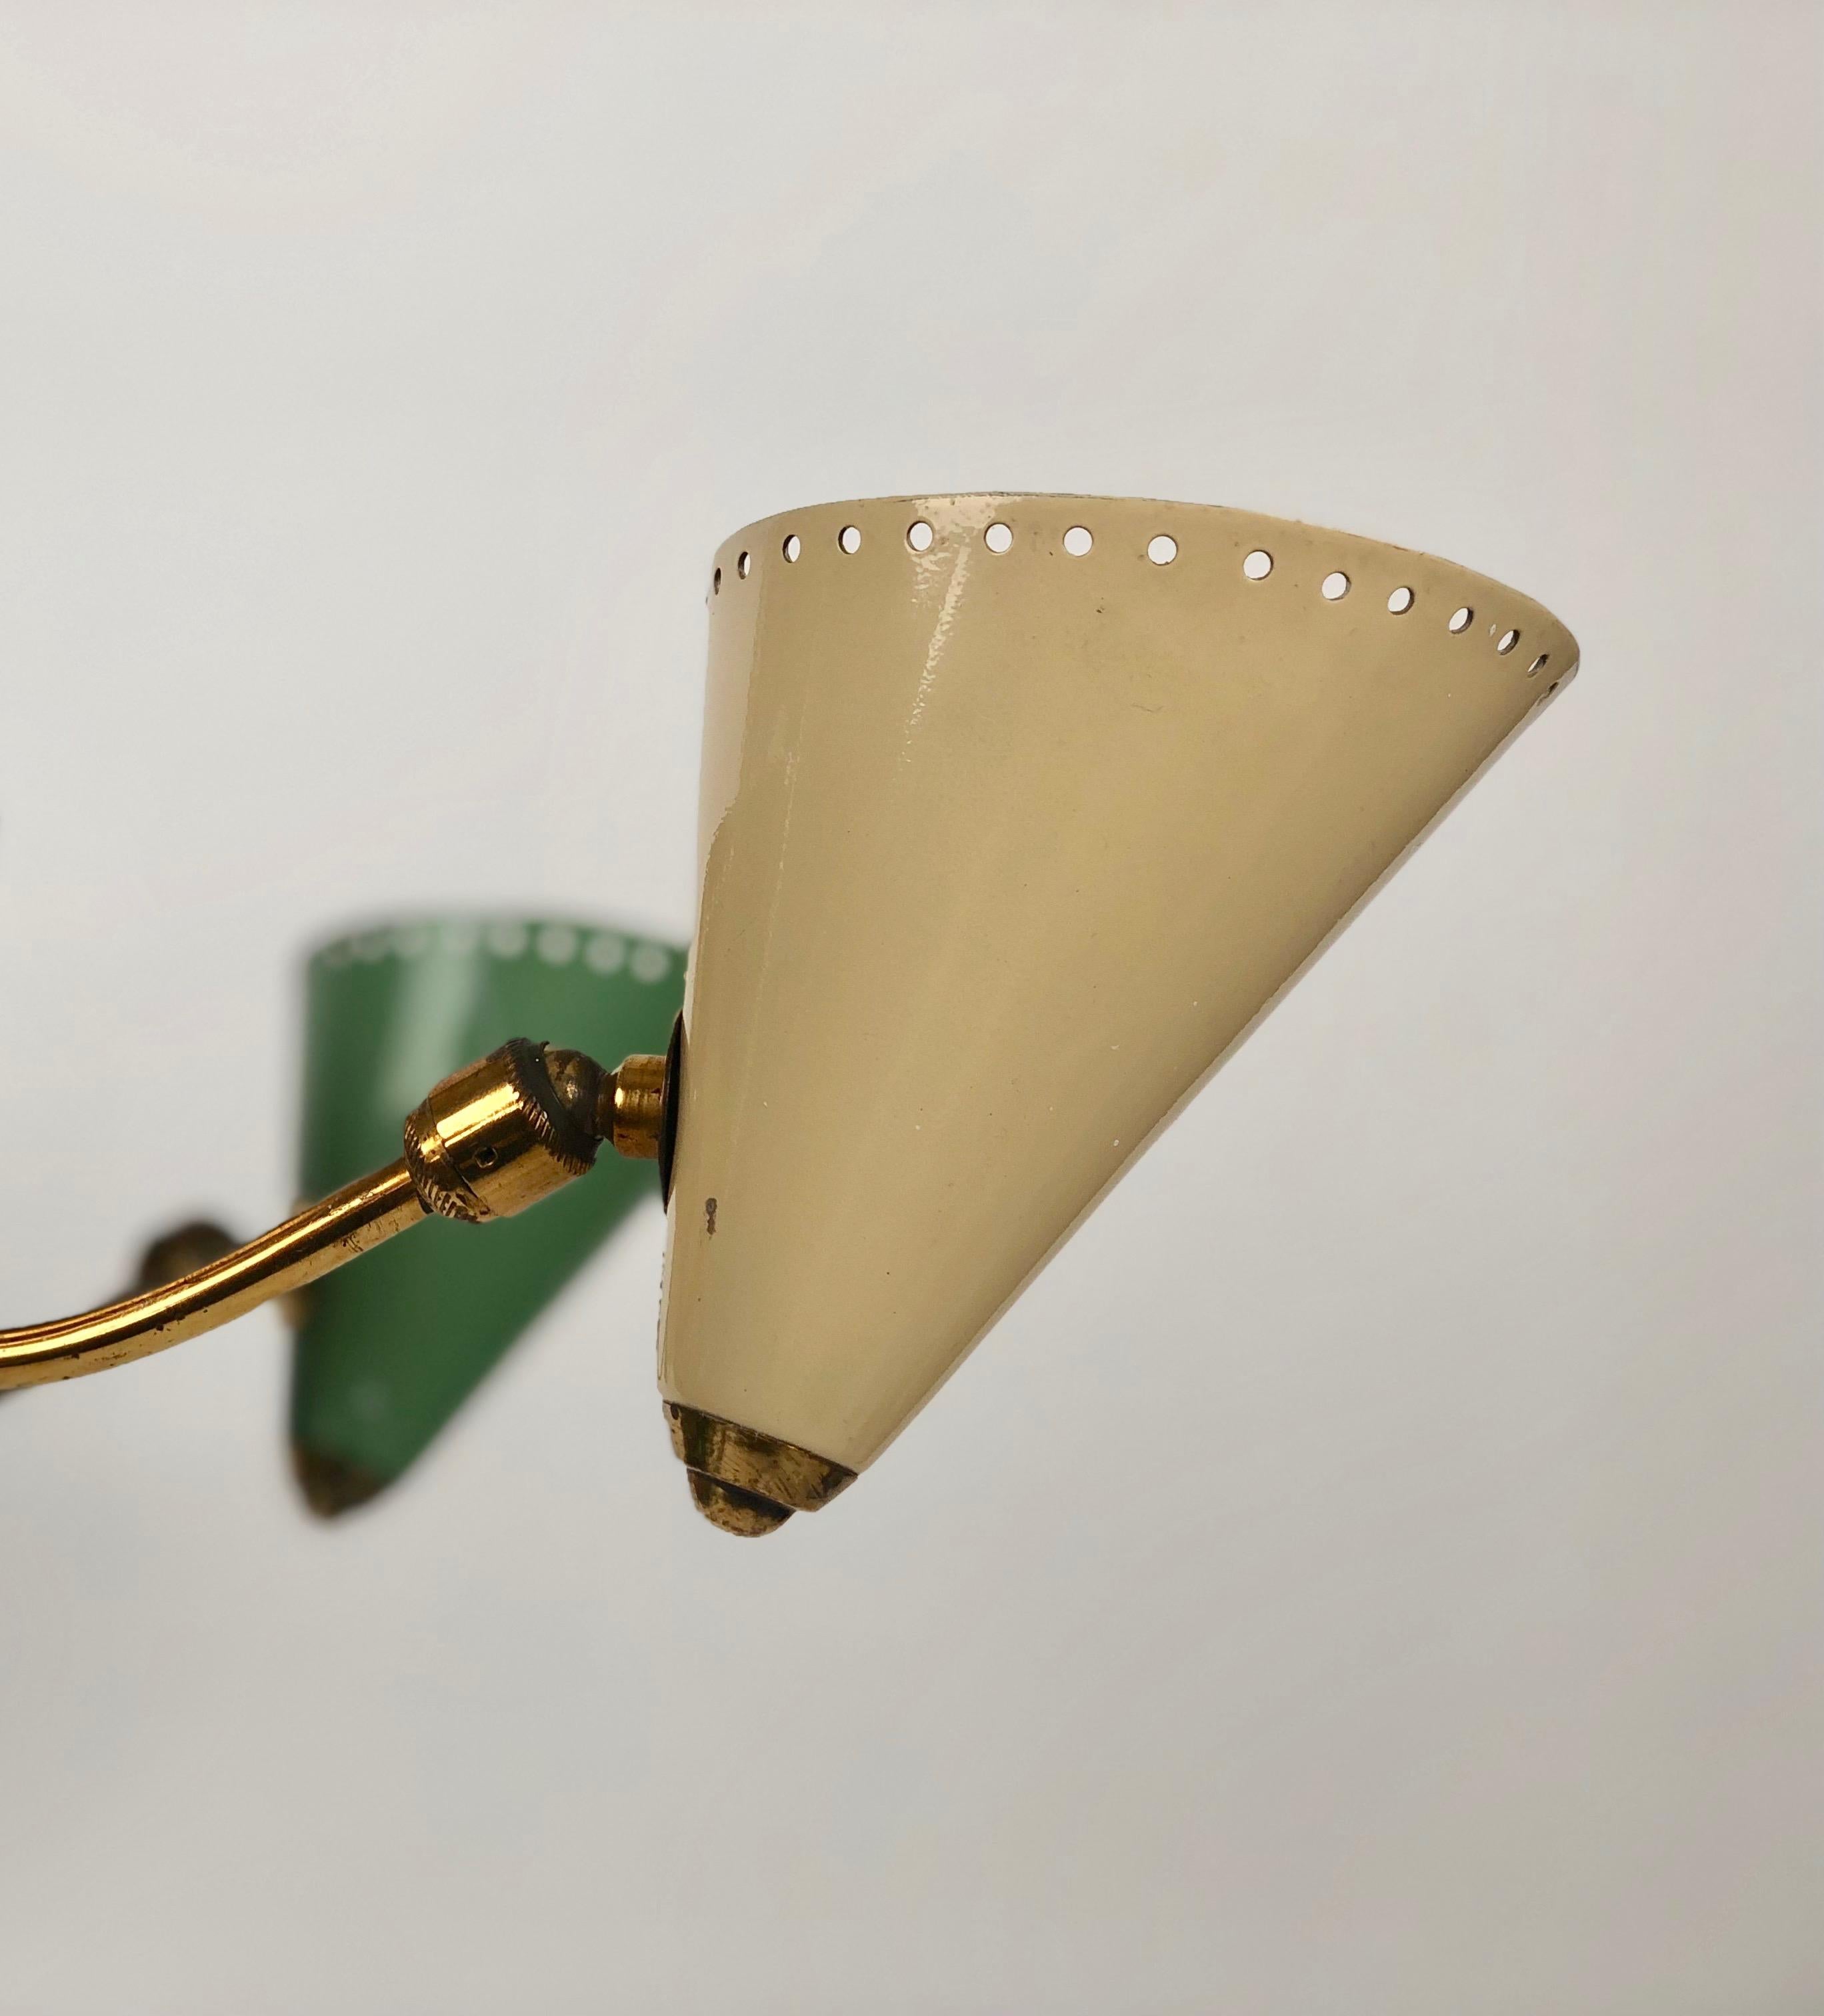 Enameled Italian Chandelier in Brass and Enamel Colour Cones, 1950 s, Italy For Sale